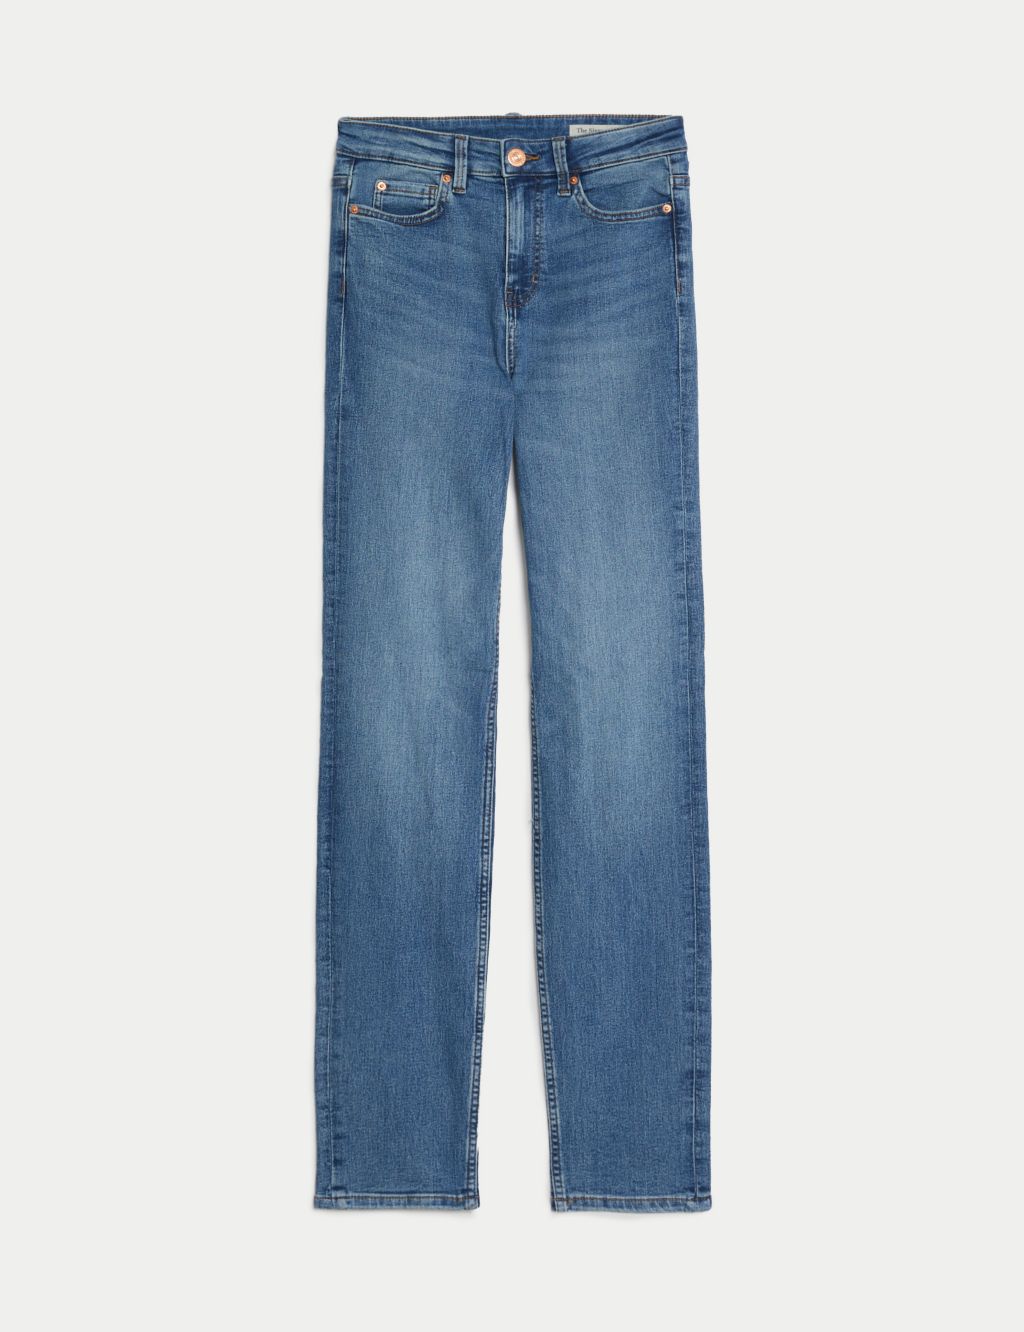 Sienna Straight Leg Jeans with Stretch image 2